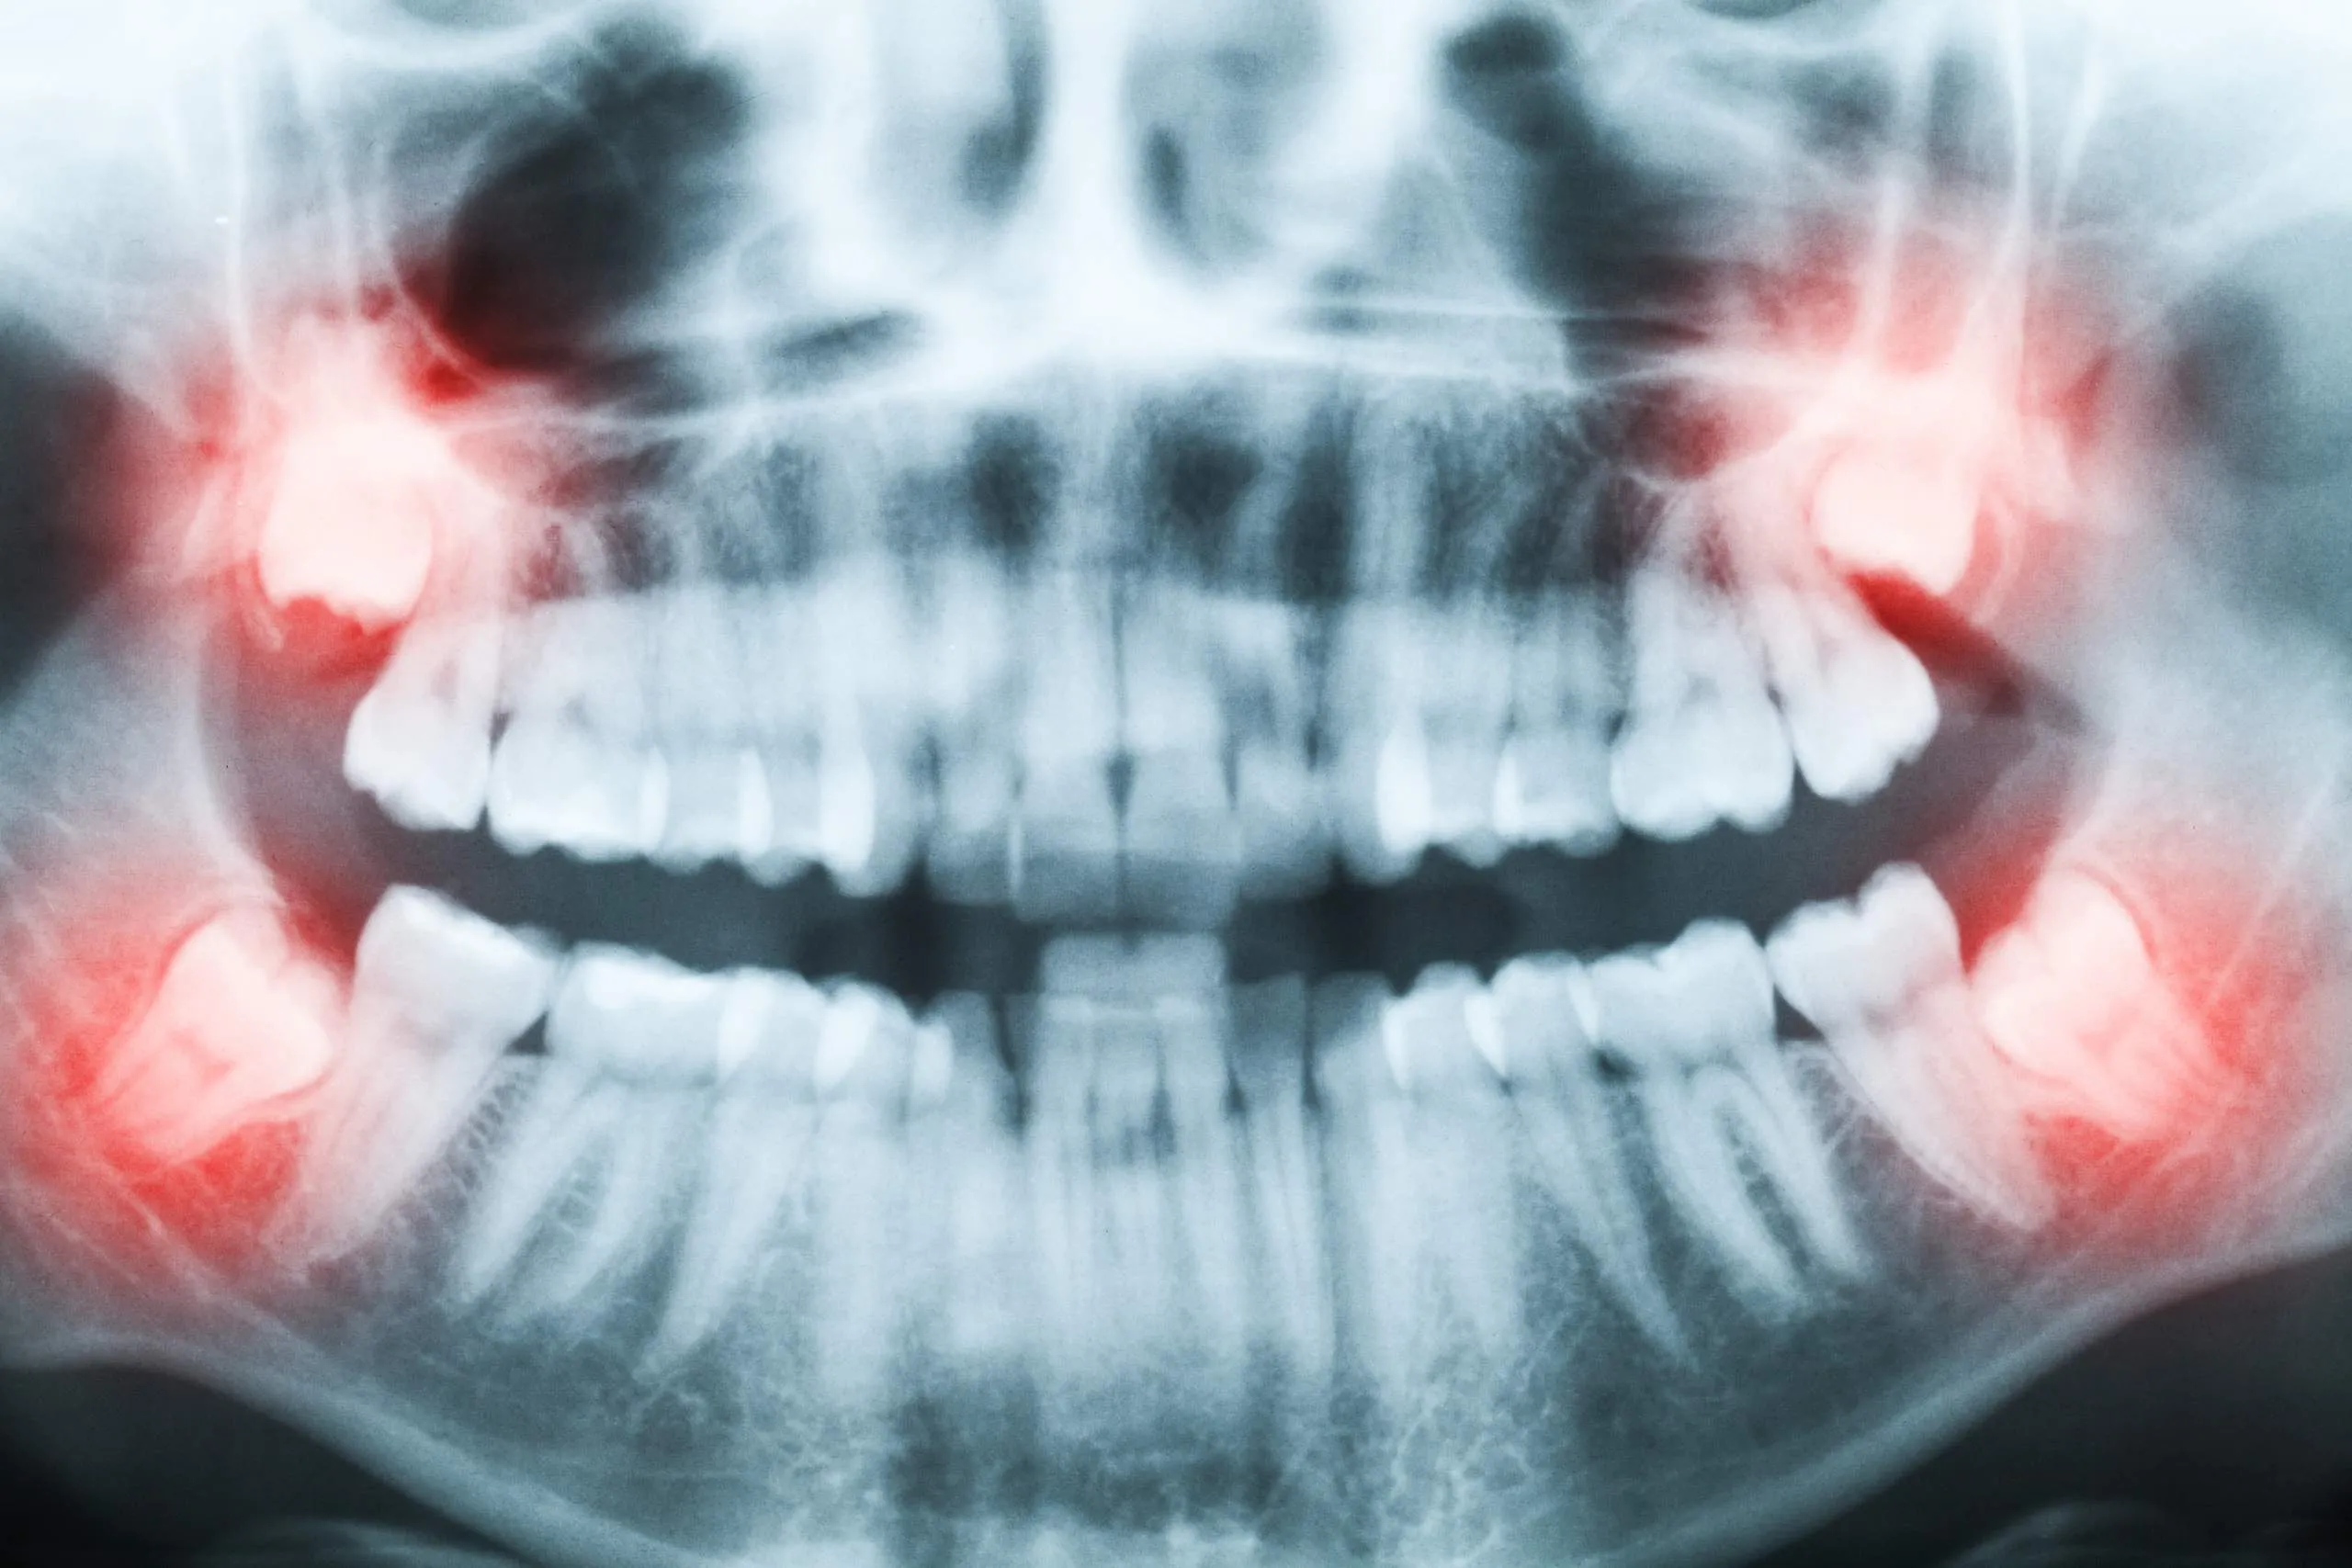 How to Get Wisdom Teeth Removed for Less